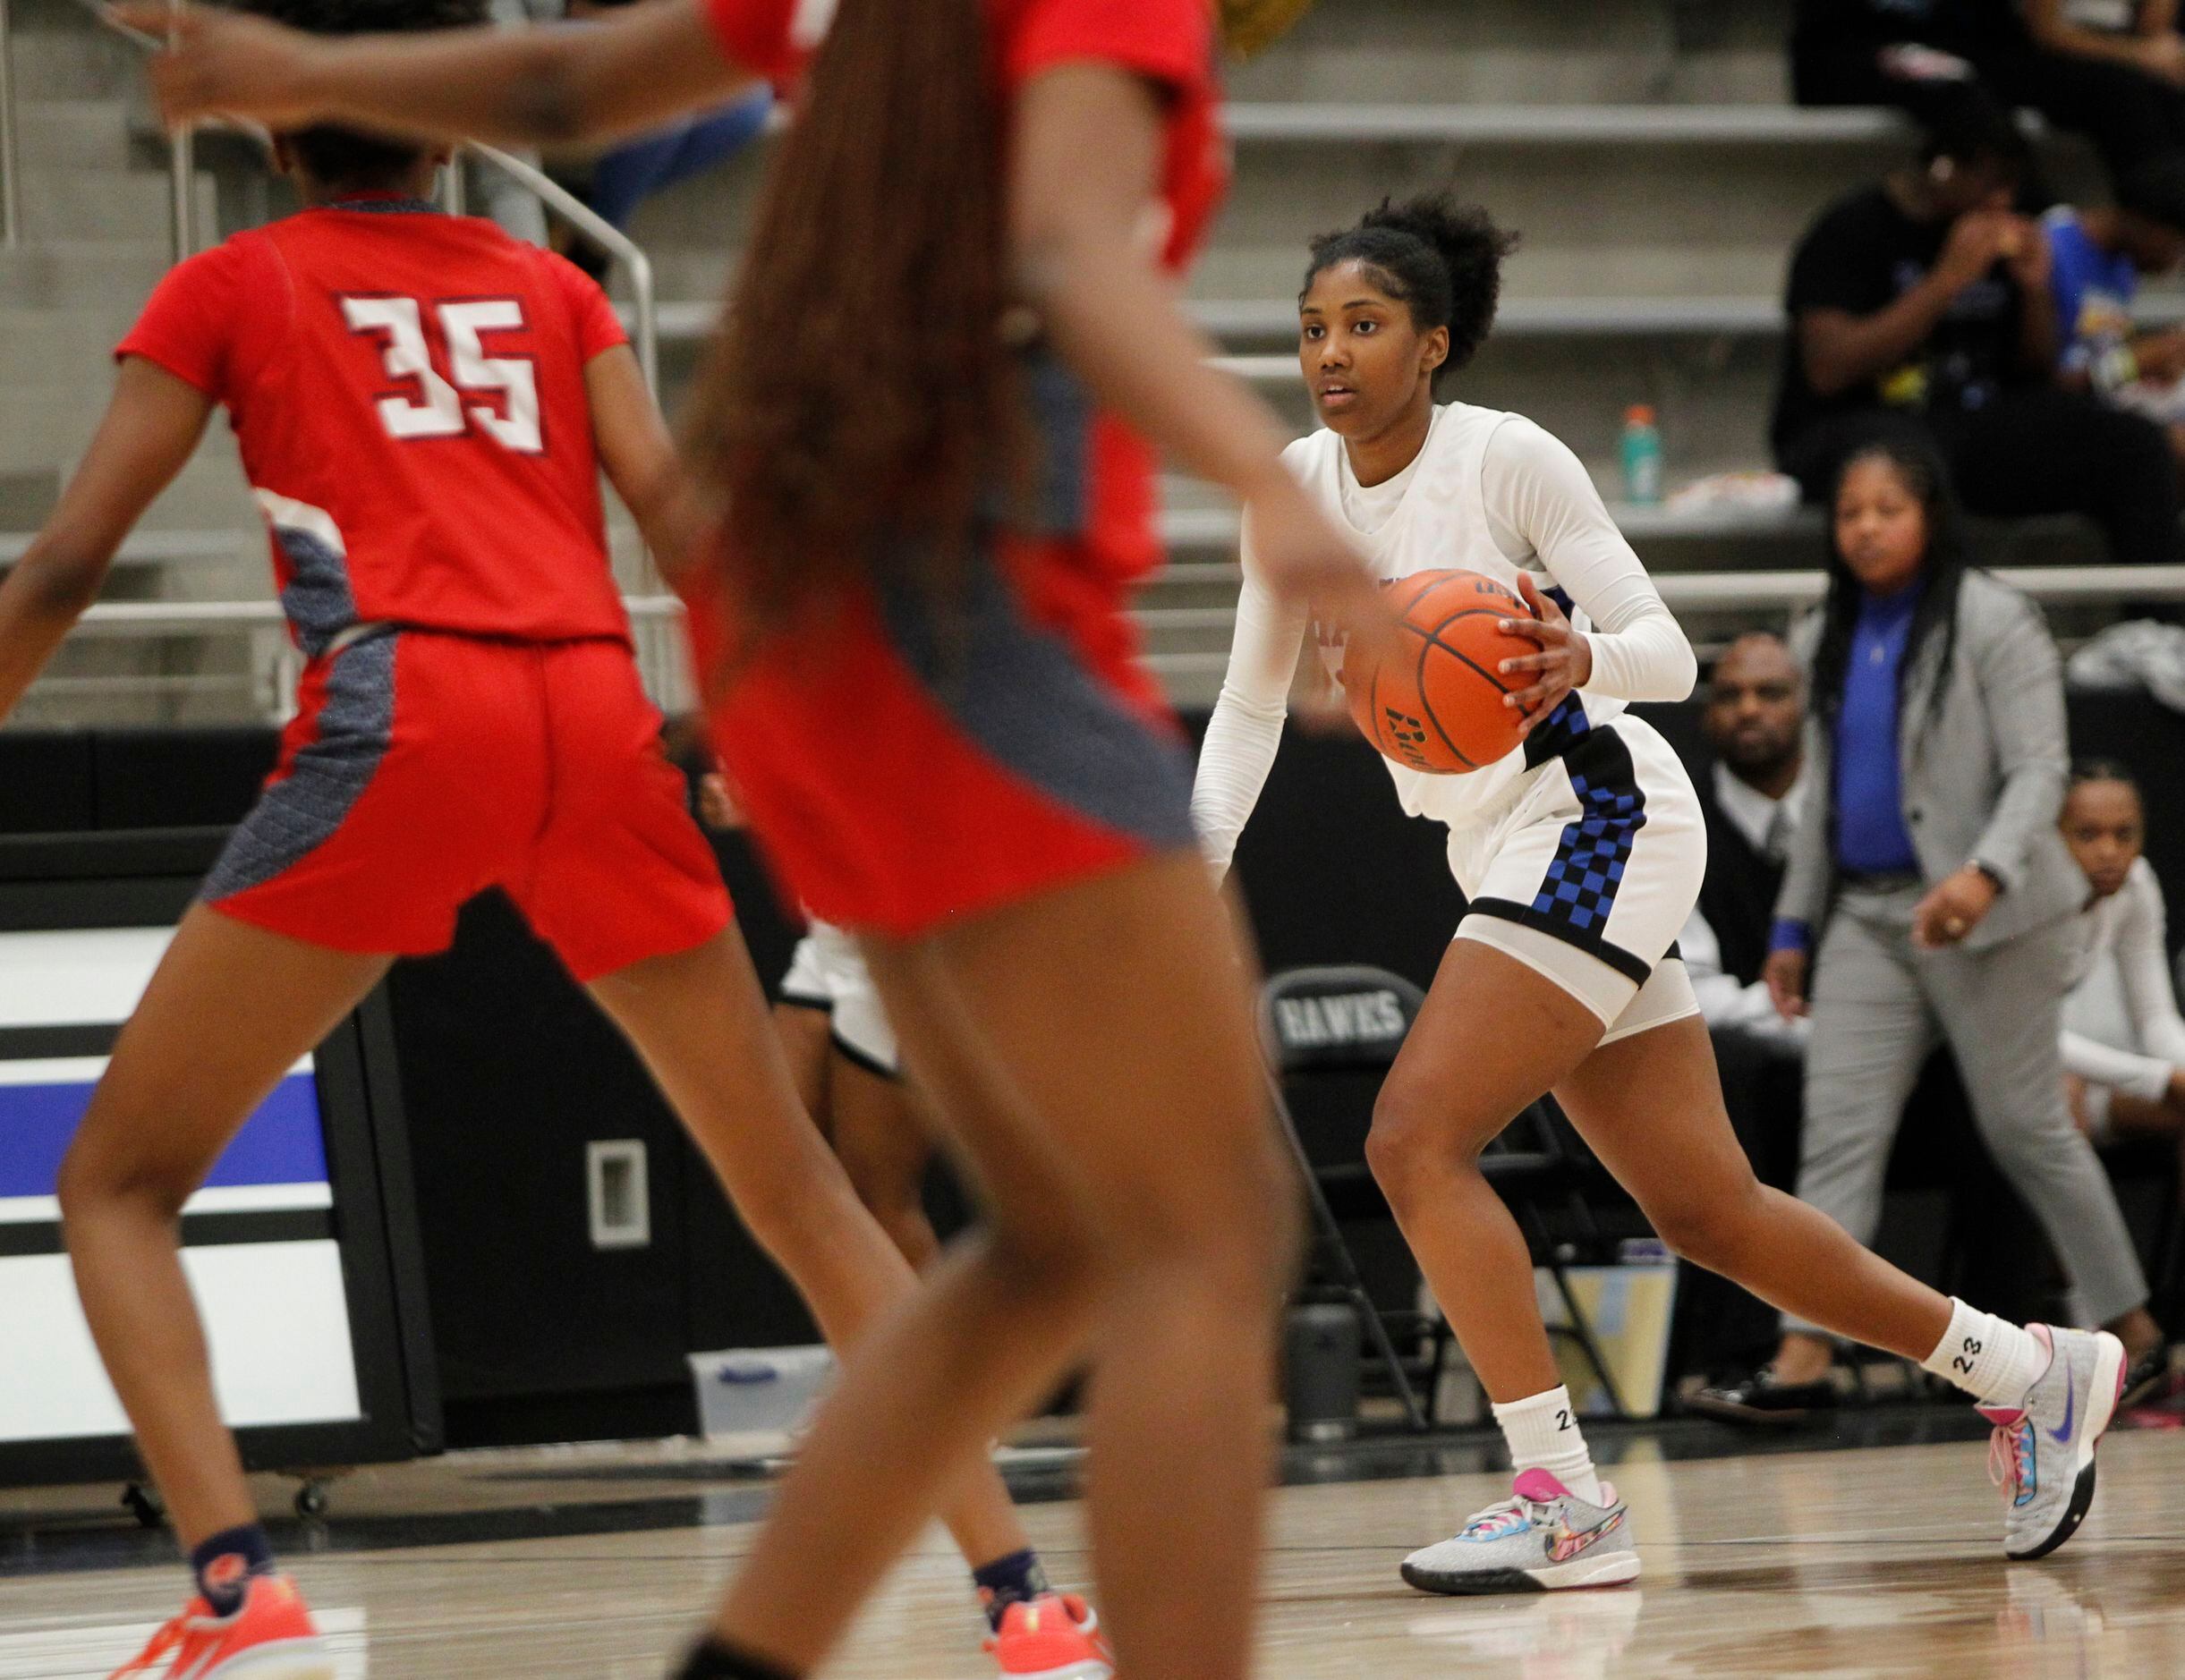 Hebron guard Paris Bradley (23), right, brings the ball past mid-court during first half...